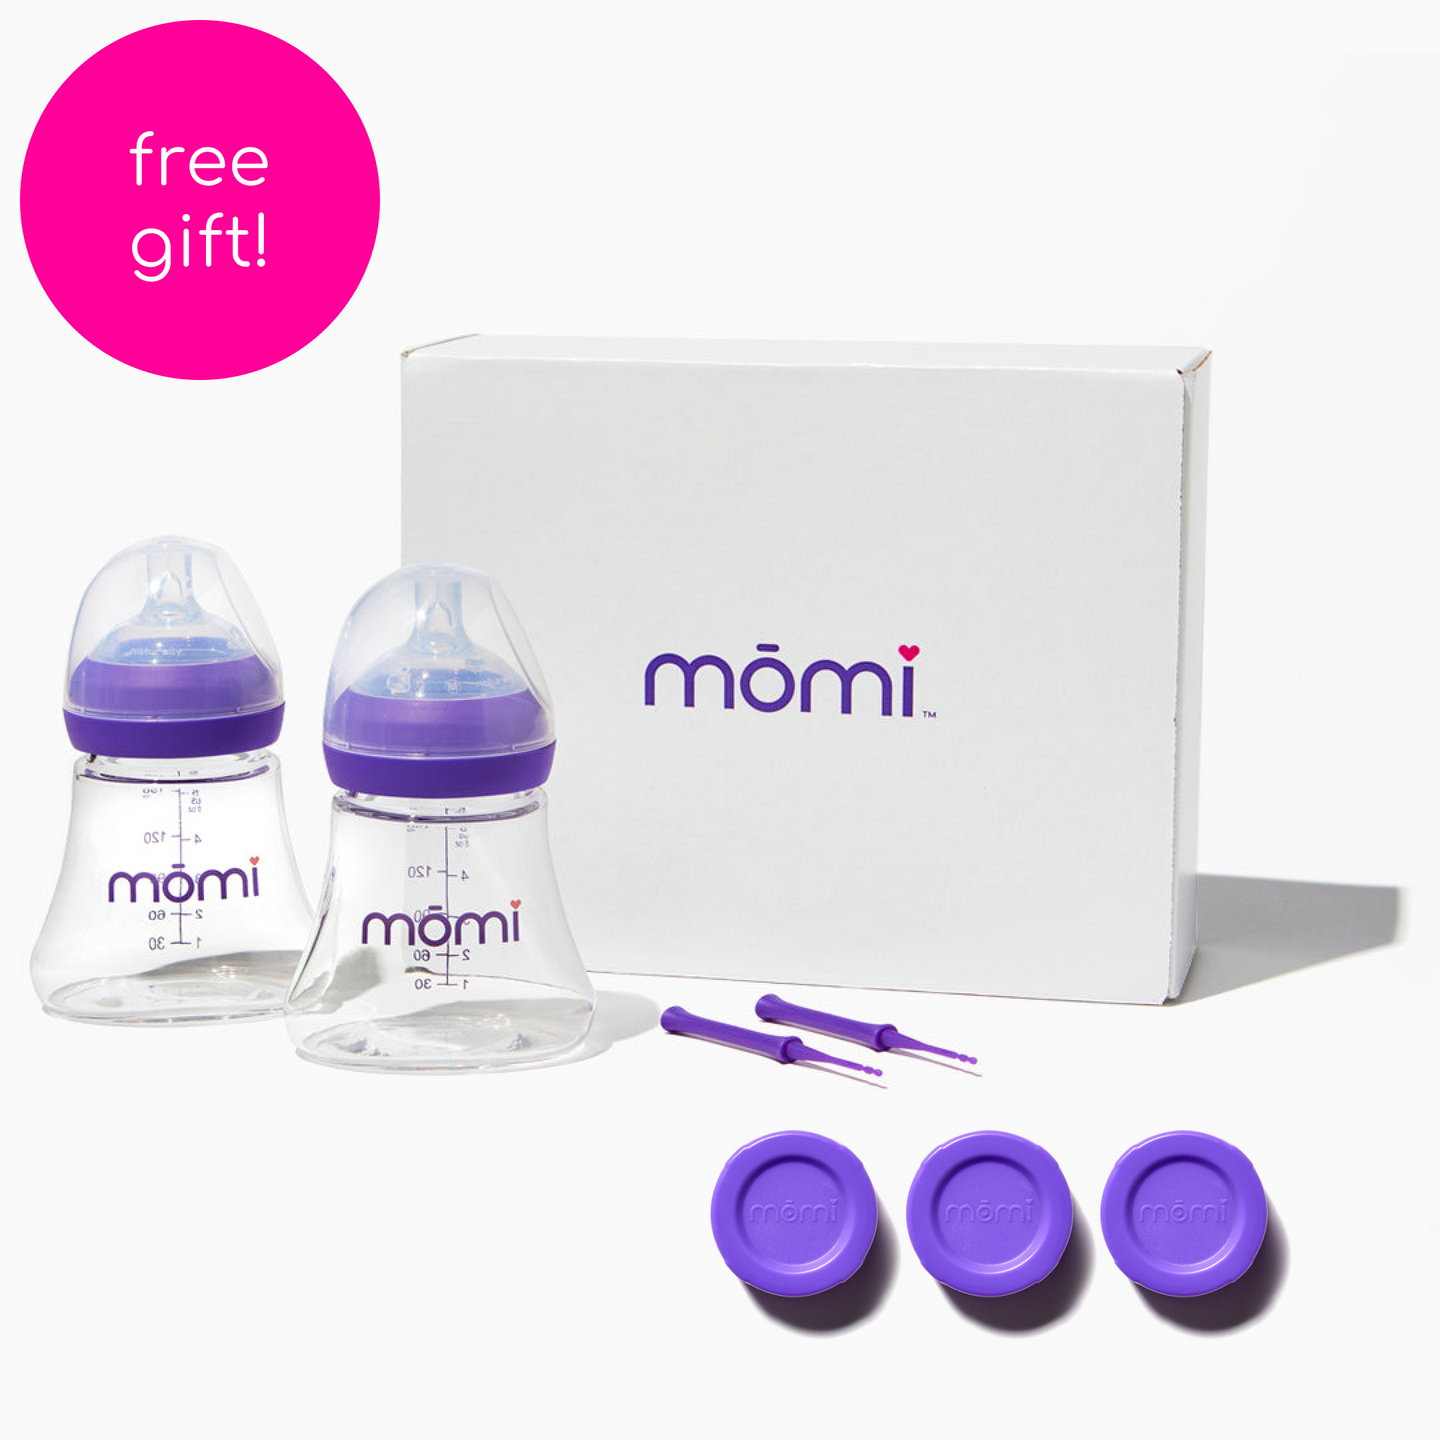 2-bottle set + free gift with purchase